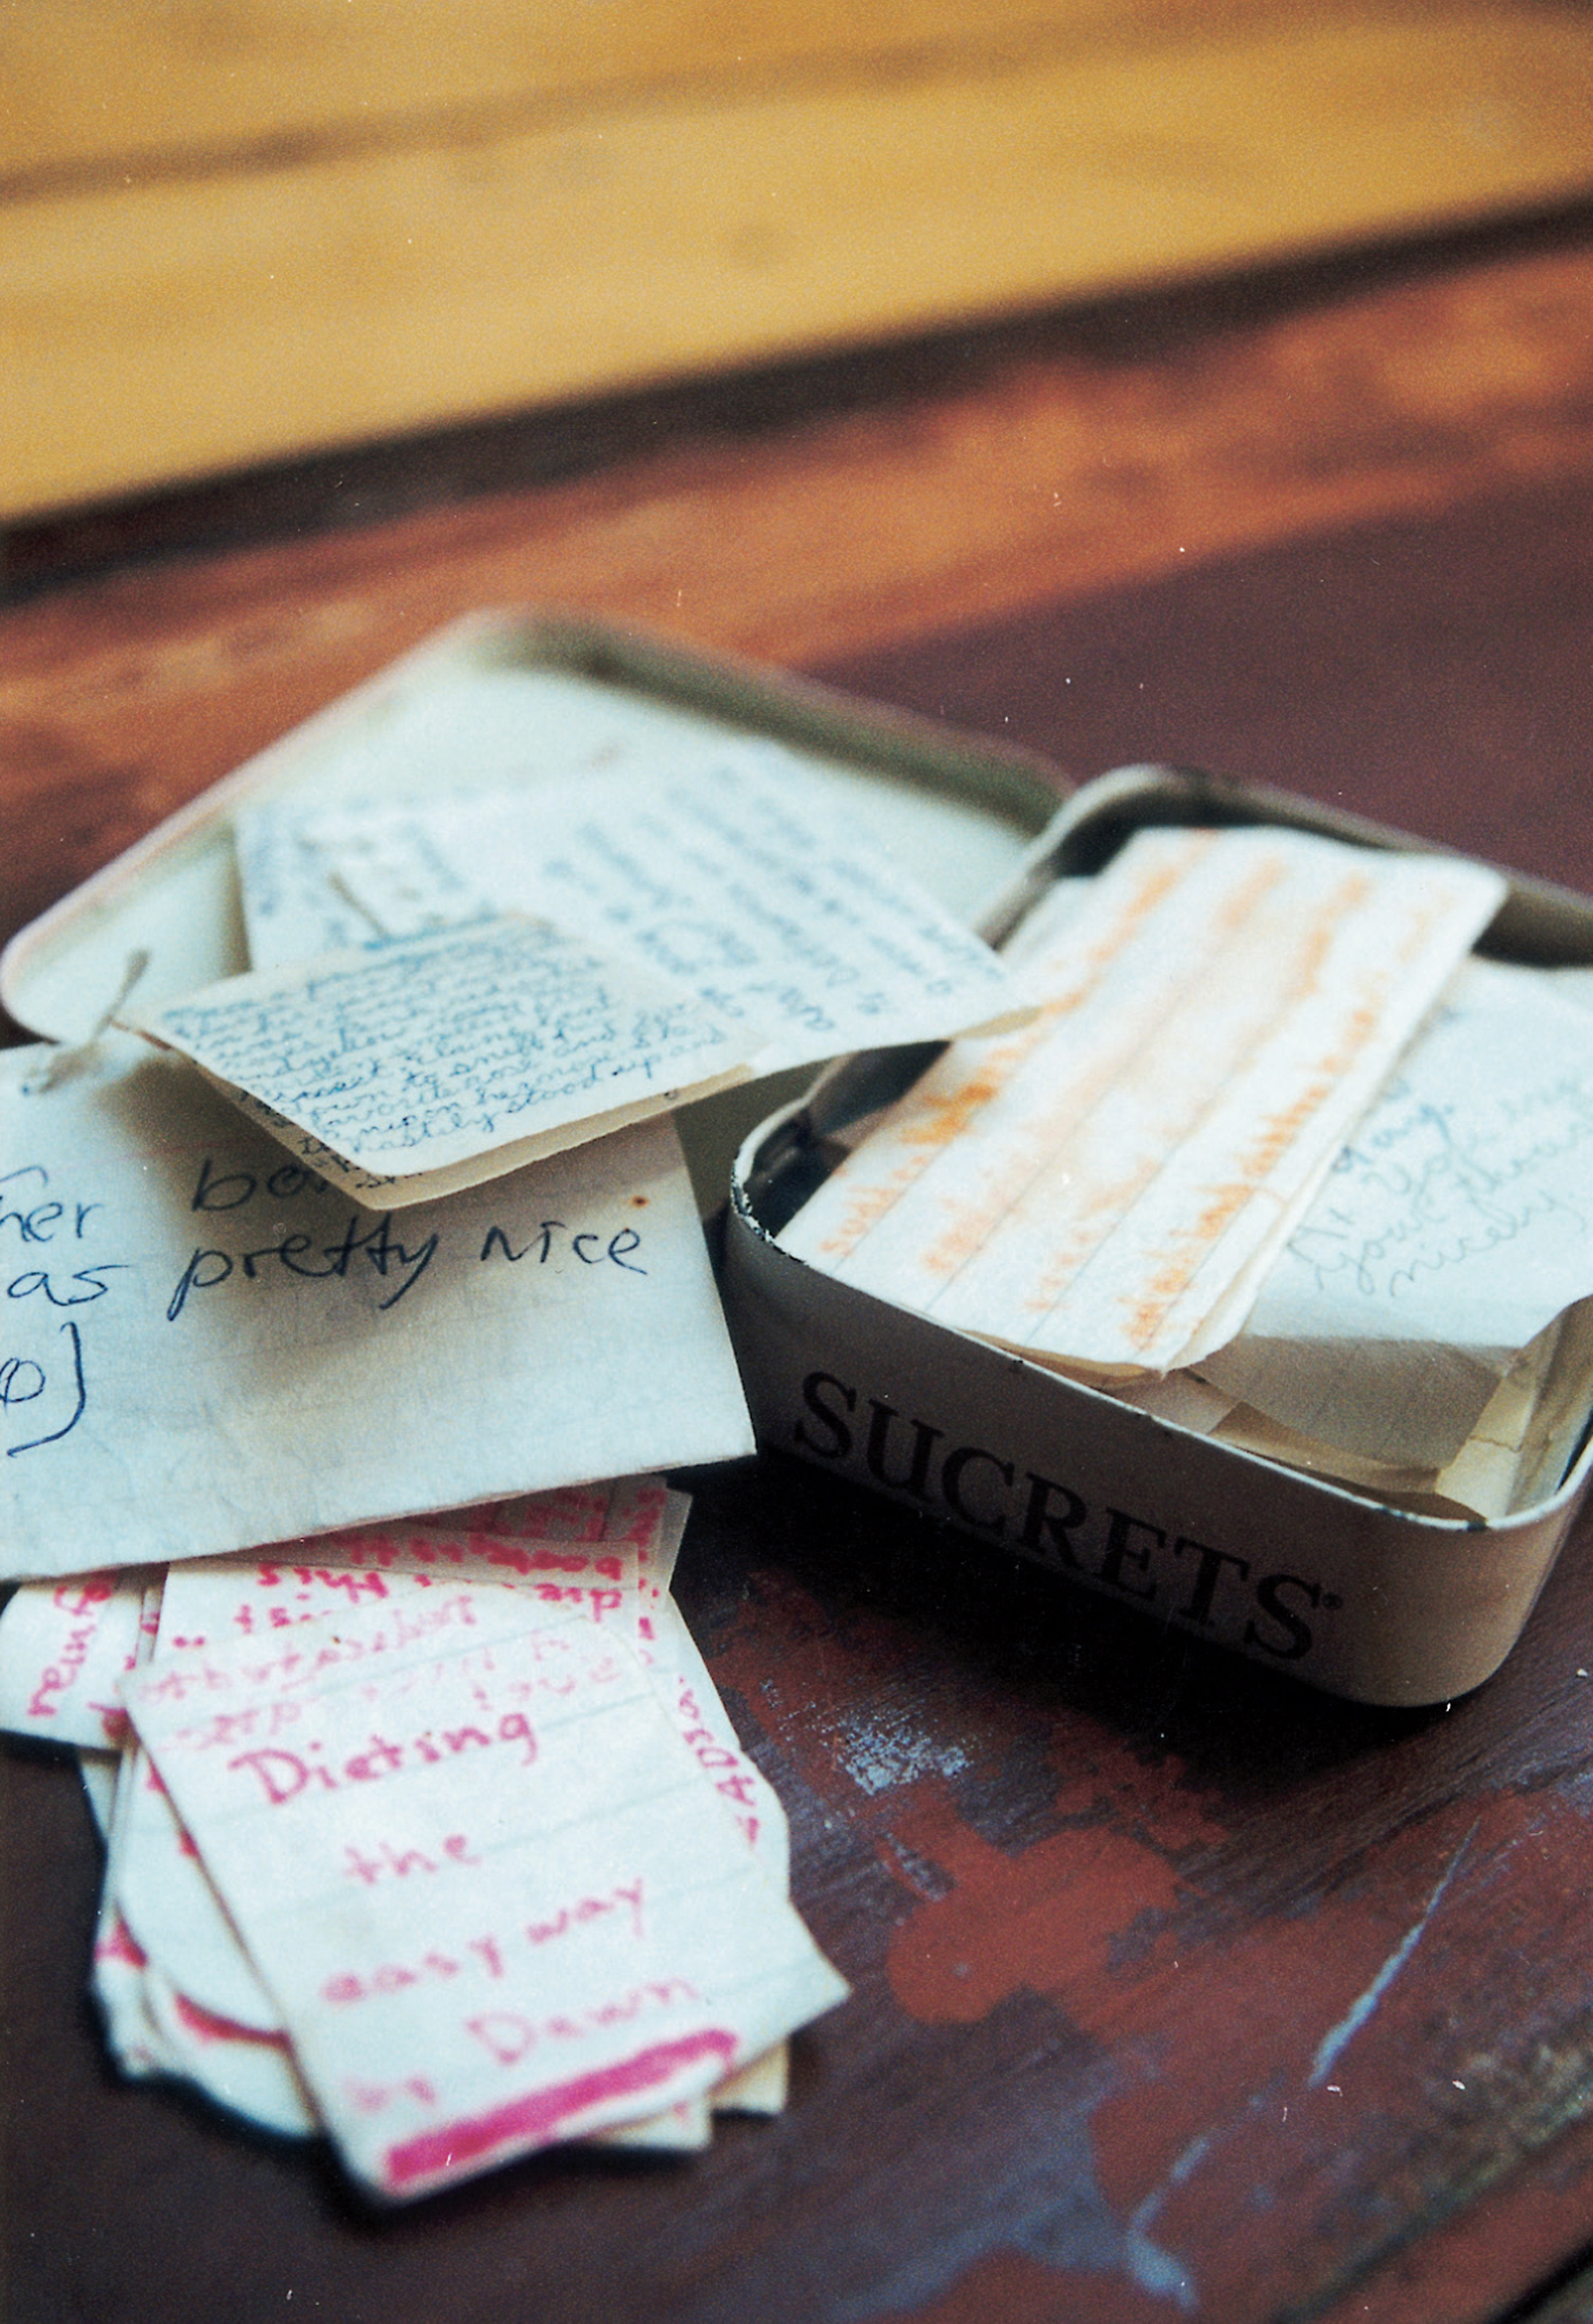 A photograph depicting a small metal box containing scraps of paper. The caption reads: Tin “SUCRETS” box containing the assembled writings of the dolls in various styles and formats, including literary efforts (Dawn’s “A true-life romance”, Harvey’s “Moments with Mara” and “Parakeet—A flash”), self-help publications (“Dieting the Easy Way, by Dawn,” “Madame Dotrovthnile’s Hairdressing Book”), and romantic ephemera from Dawn’s busy love life. Sucrets, a throat lozenge, was popular with the orally fixated Jacksons for its candy-like sweetness. Note that the only written texts generated within the primarily oral tradition of the Doll Games are preserved in what one might call a “voice box”! The resemblance of Sucrets to secrets will not escape the attention of the careful reader.